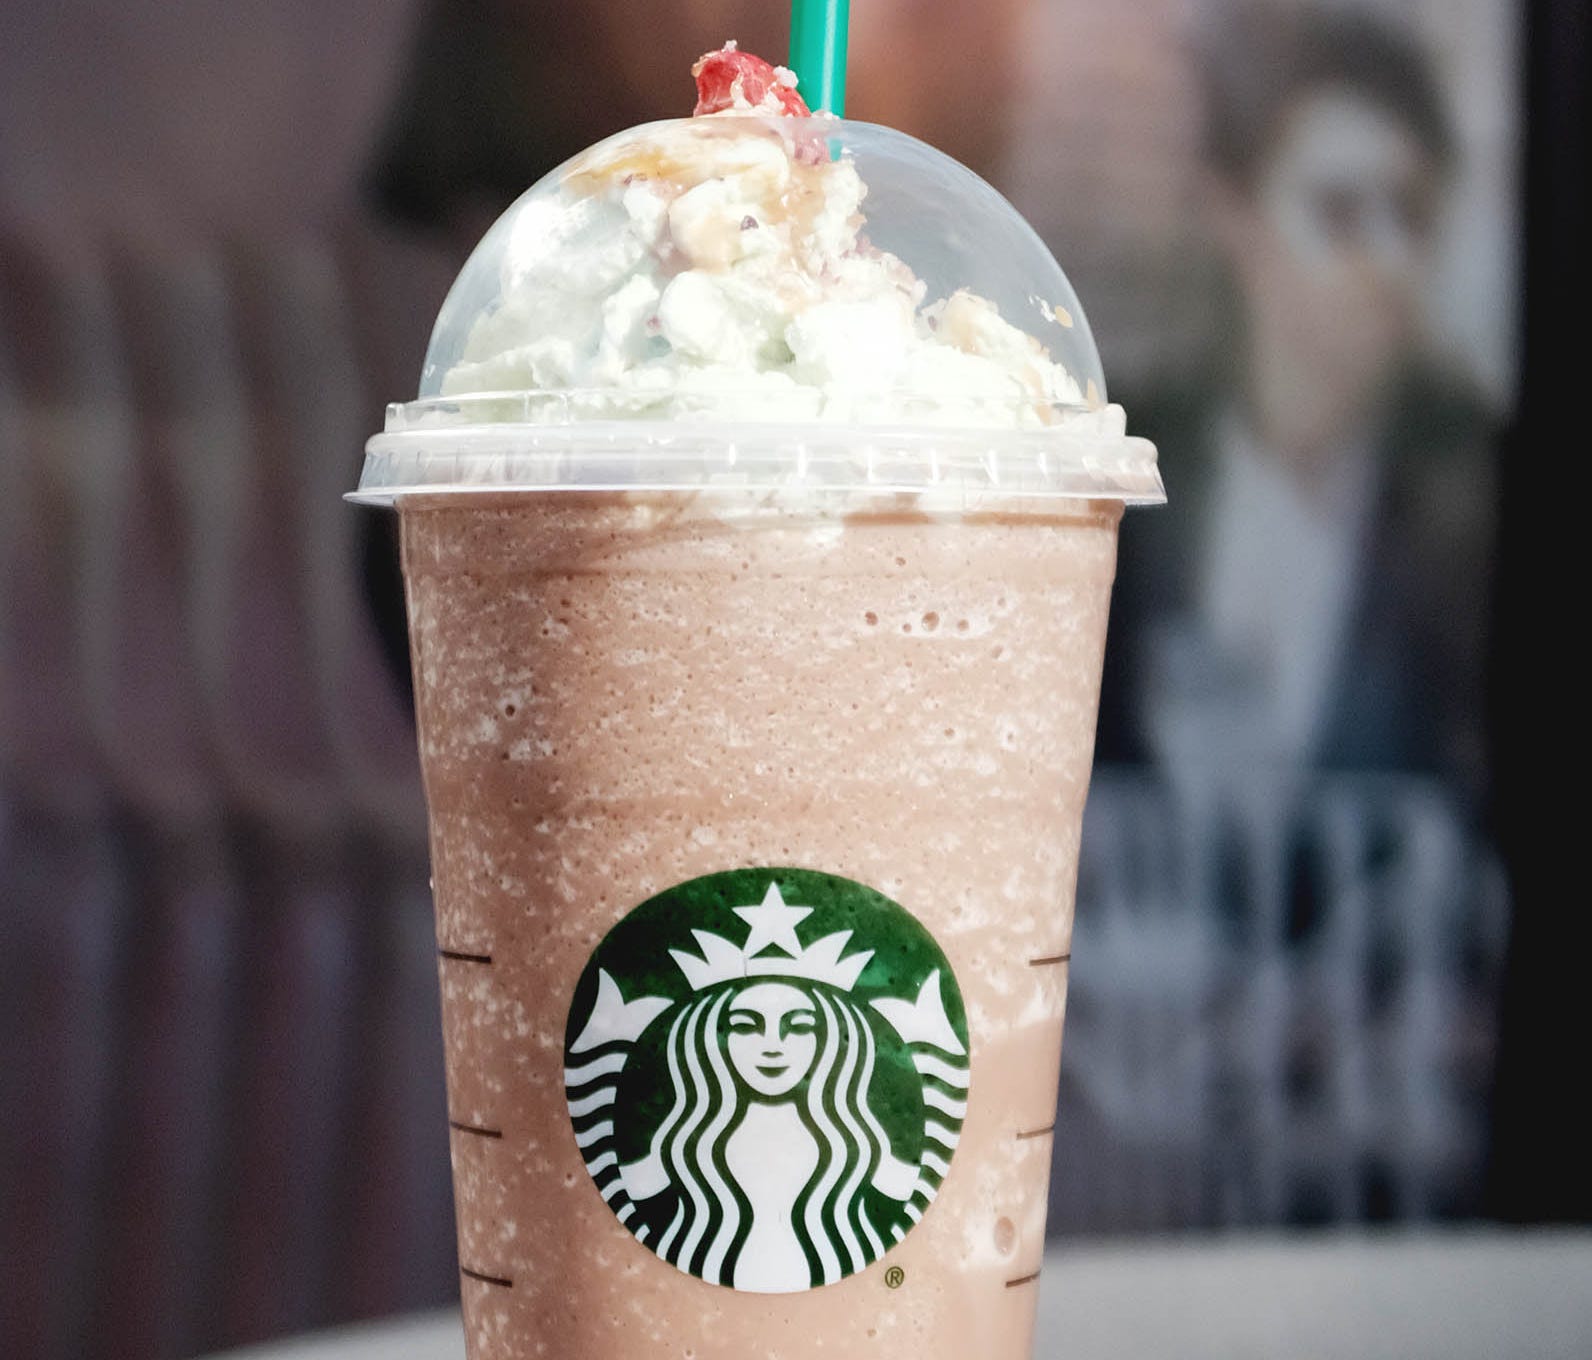 Starbucks' Christmas Frappuccino will be available for a limited time from December 7 through 11.